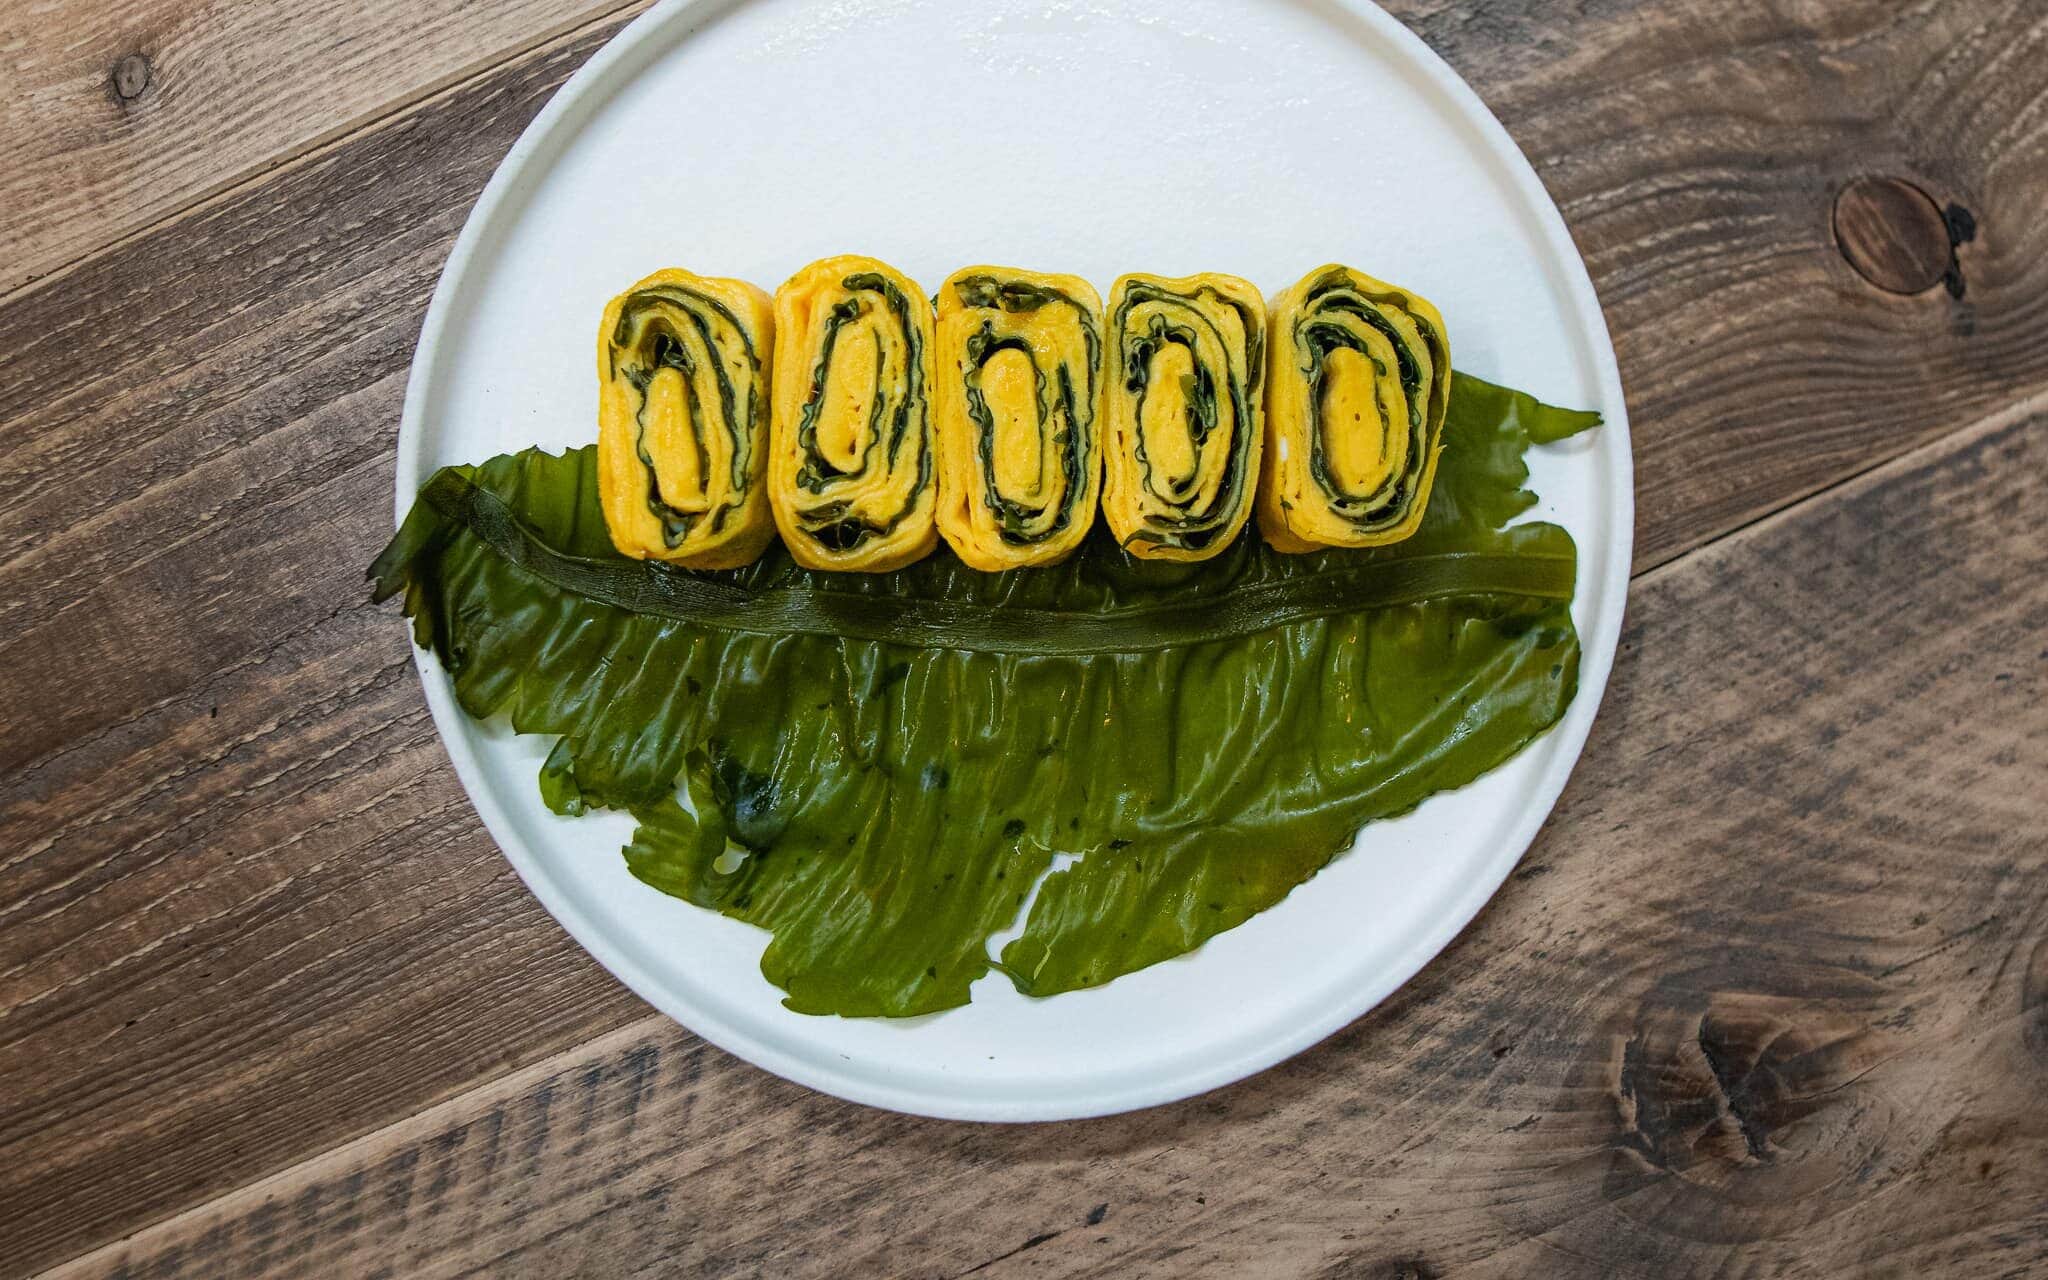 omelet rolls with winged kelp on a plate